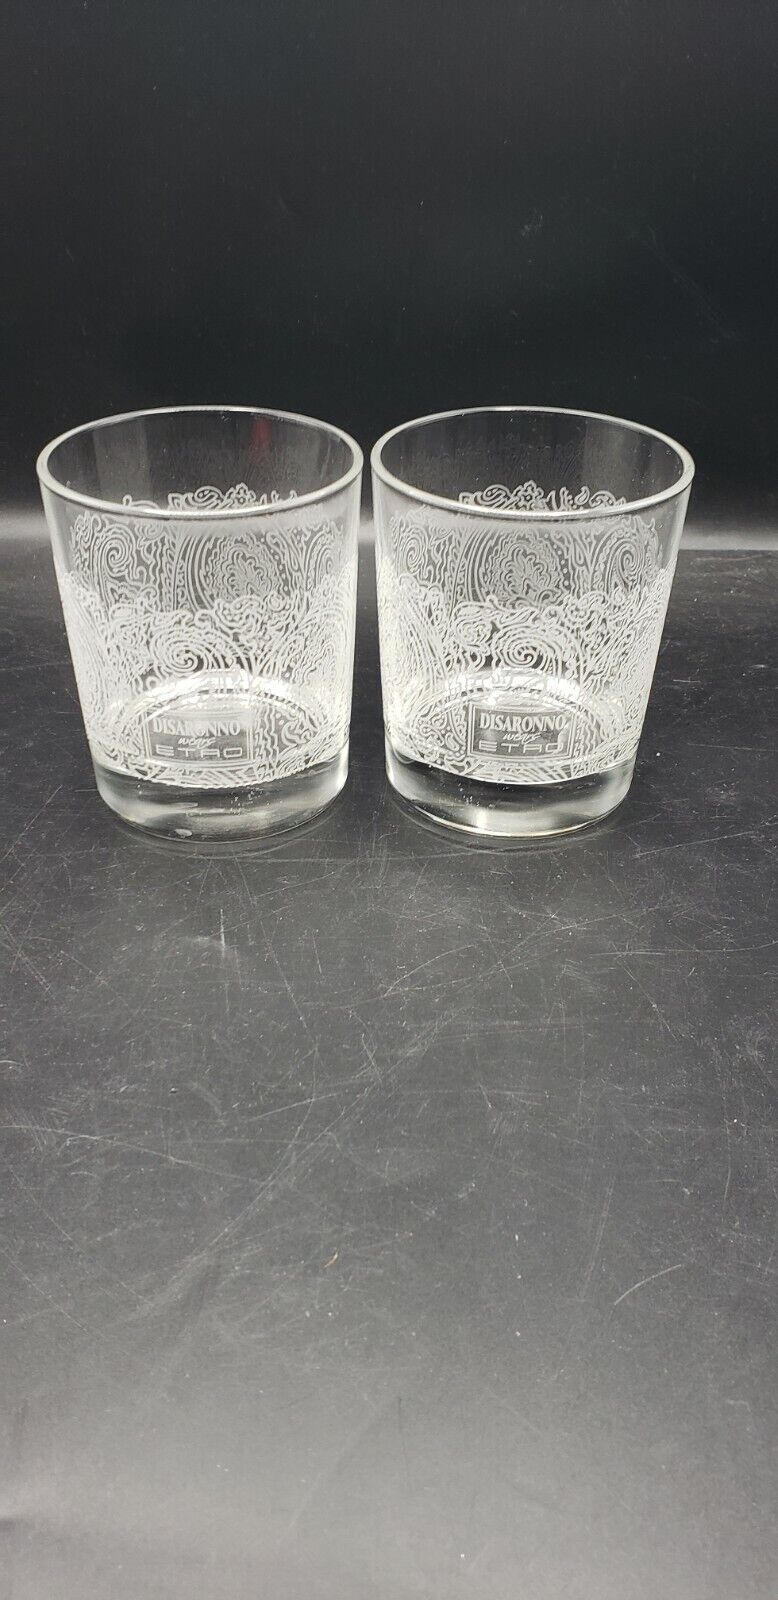 Disaronno Wears ETRO 2016 Limited Edition Rocks Old Fashioned Glass12oz Set of 2